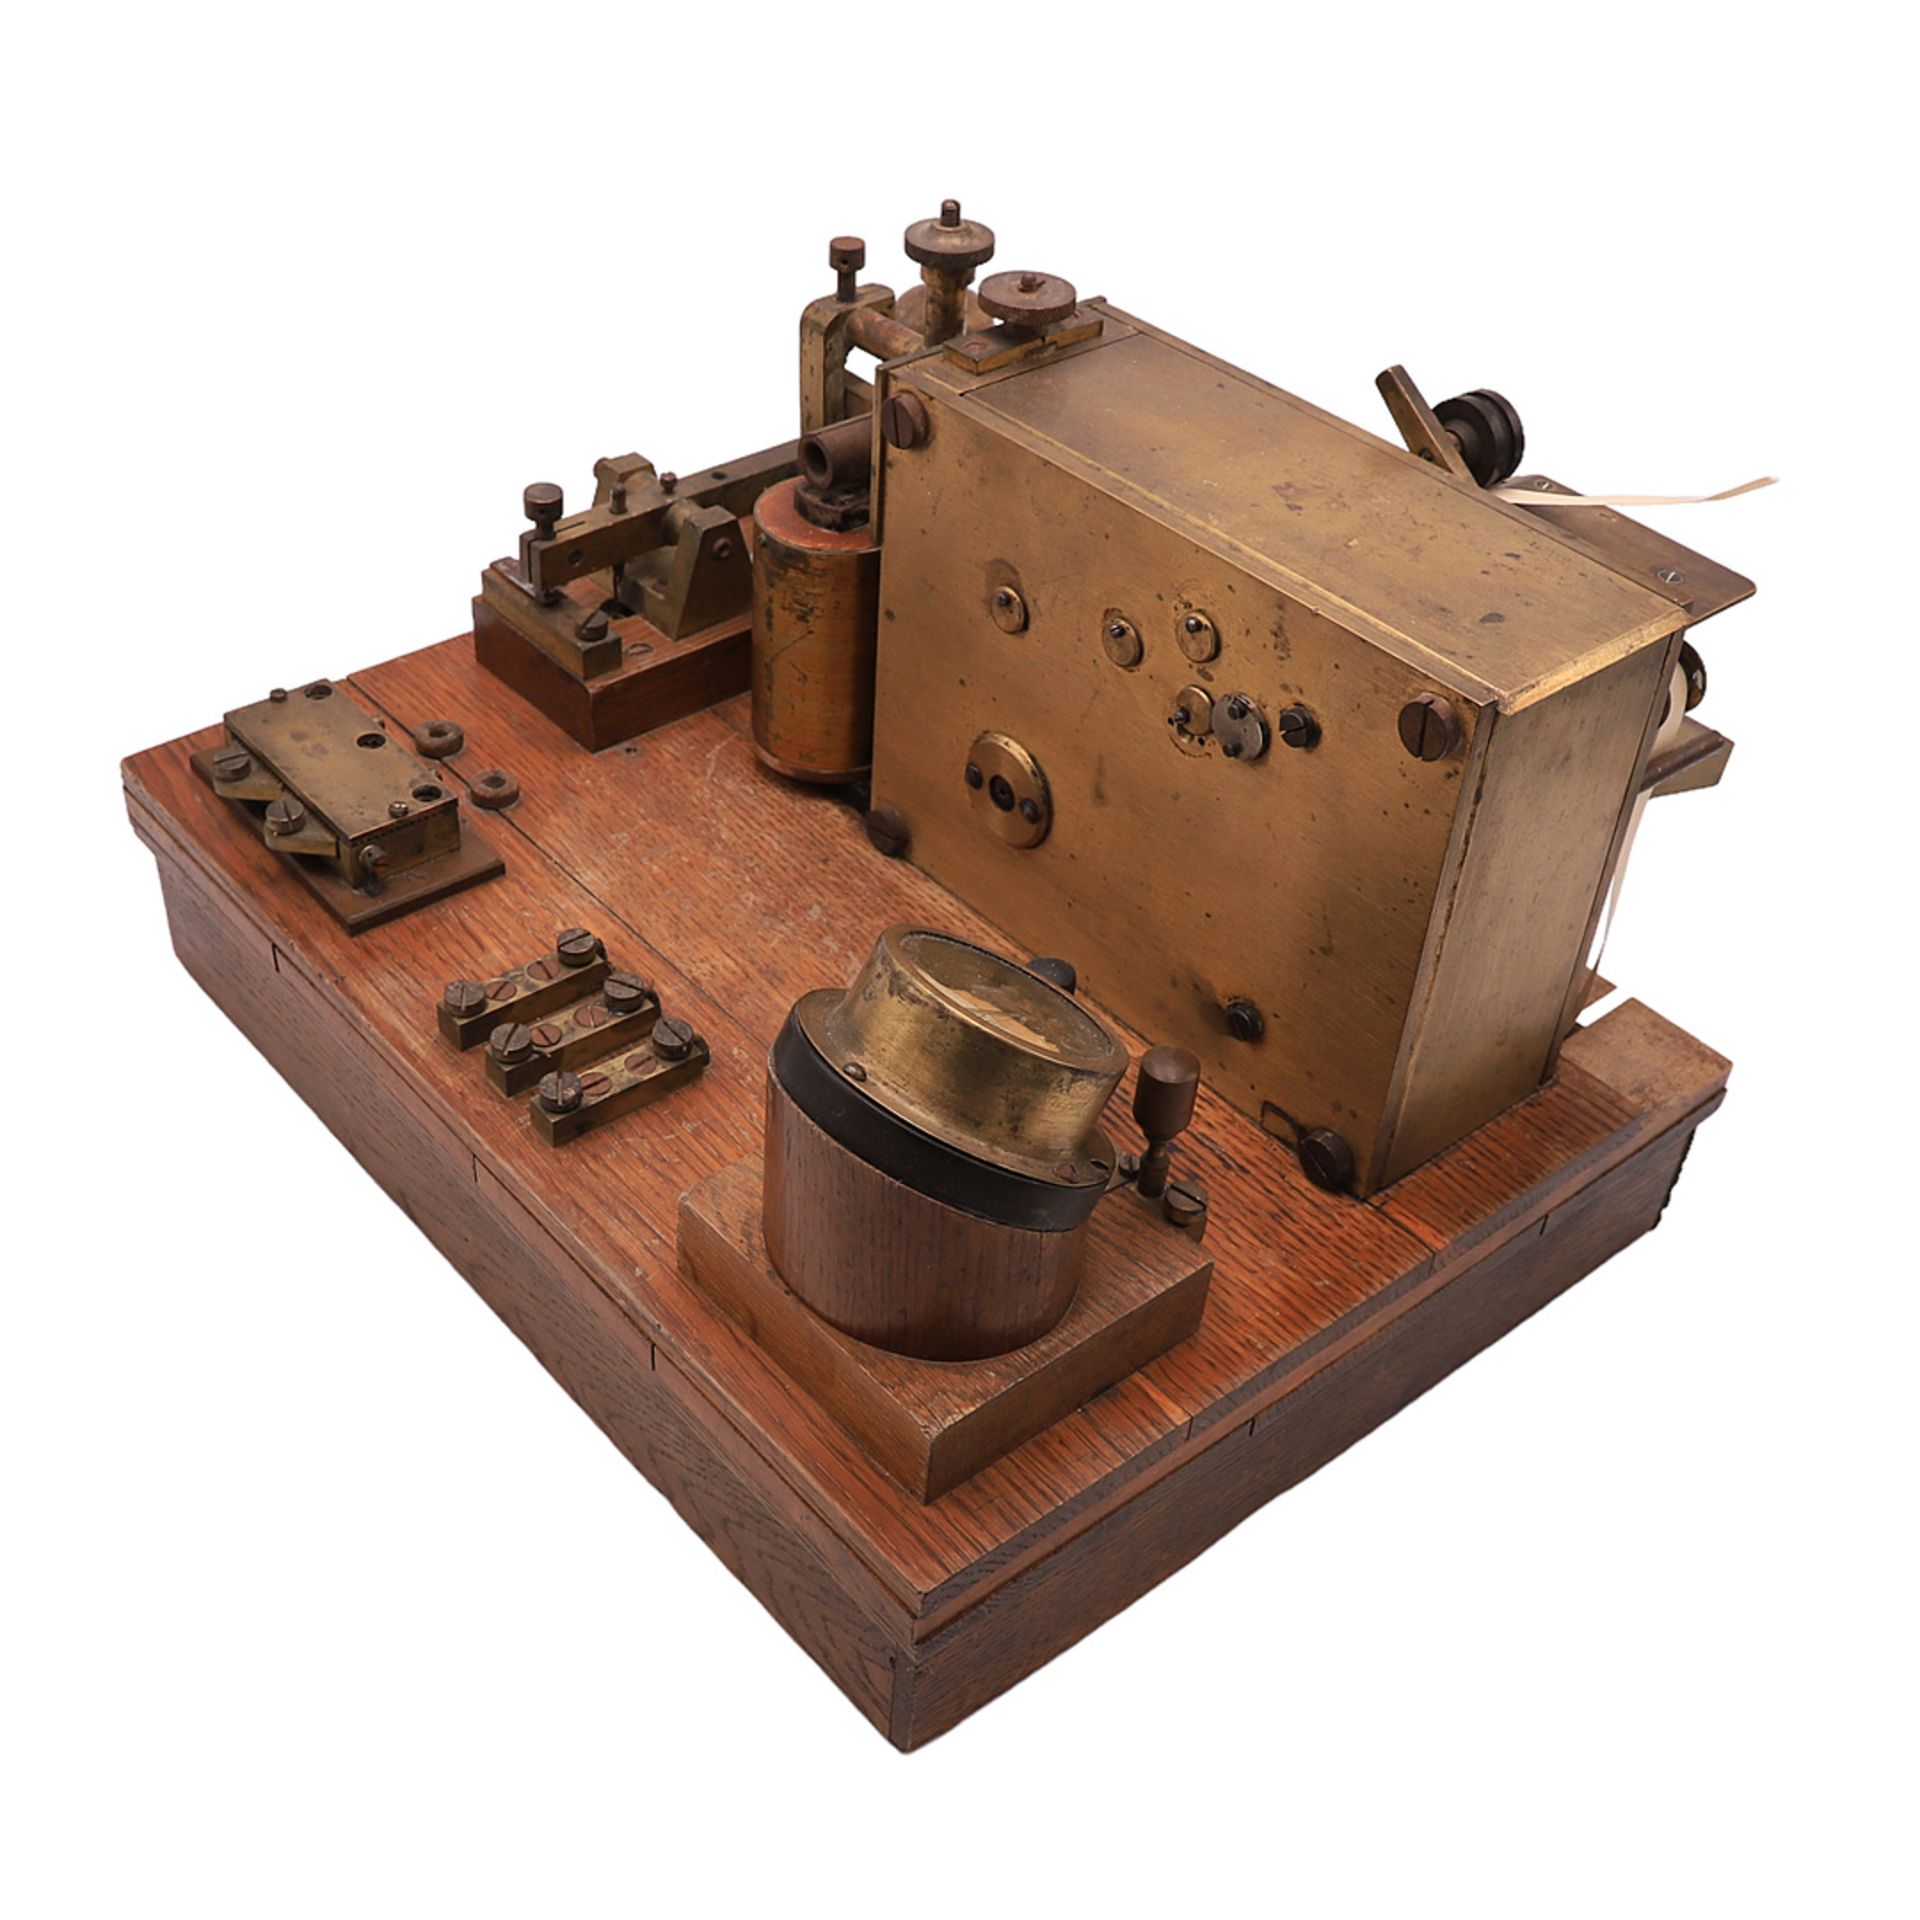 Morse code device, Germany, 2nd half of the 19th century - Image 4 of 4